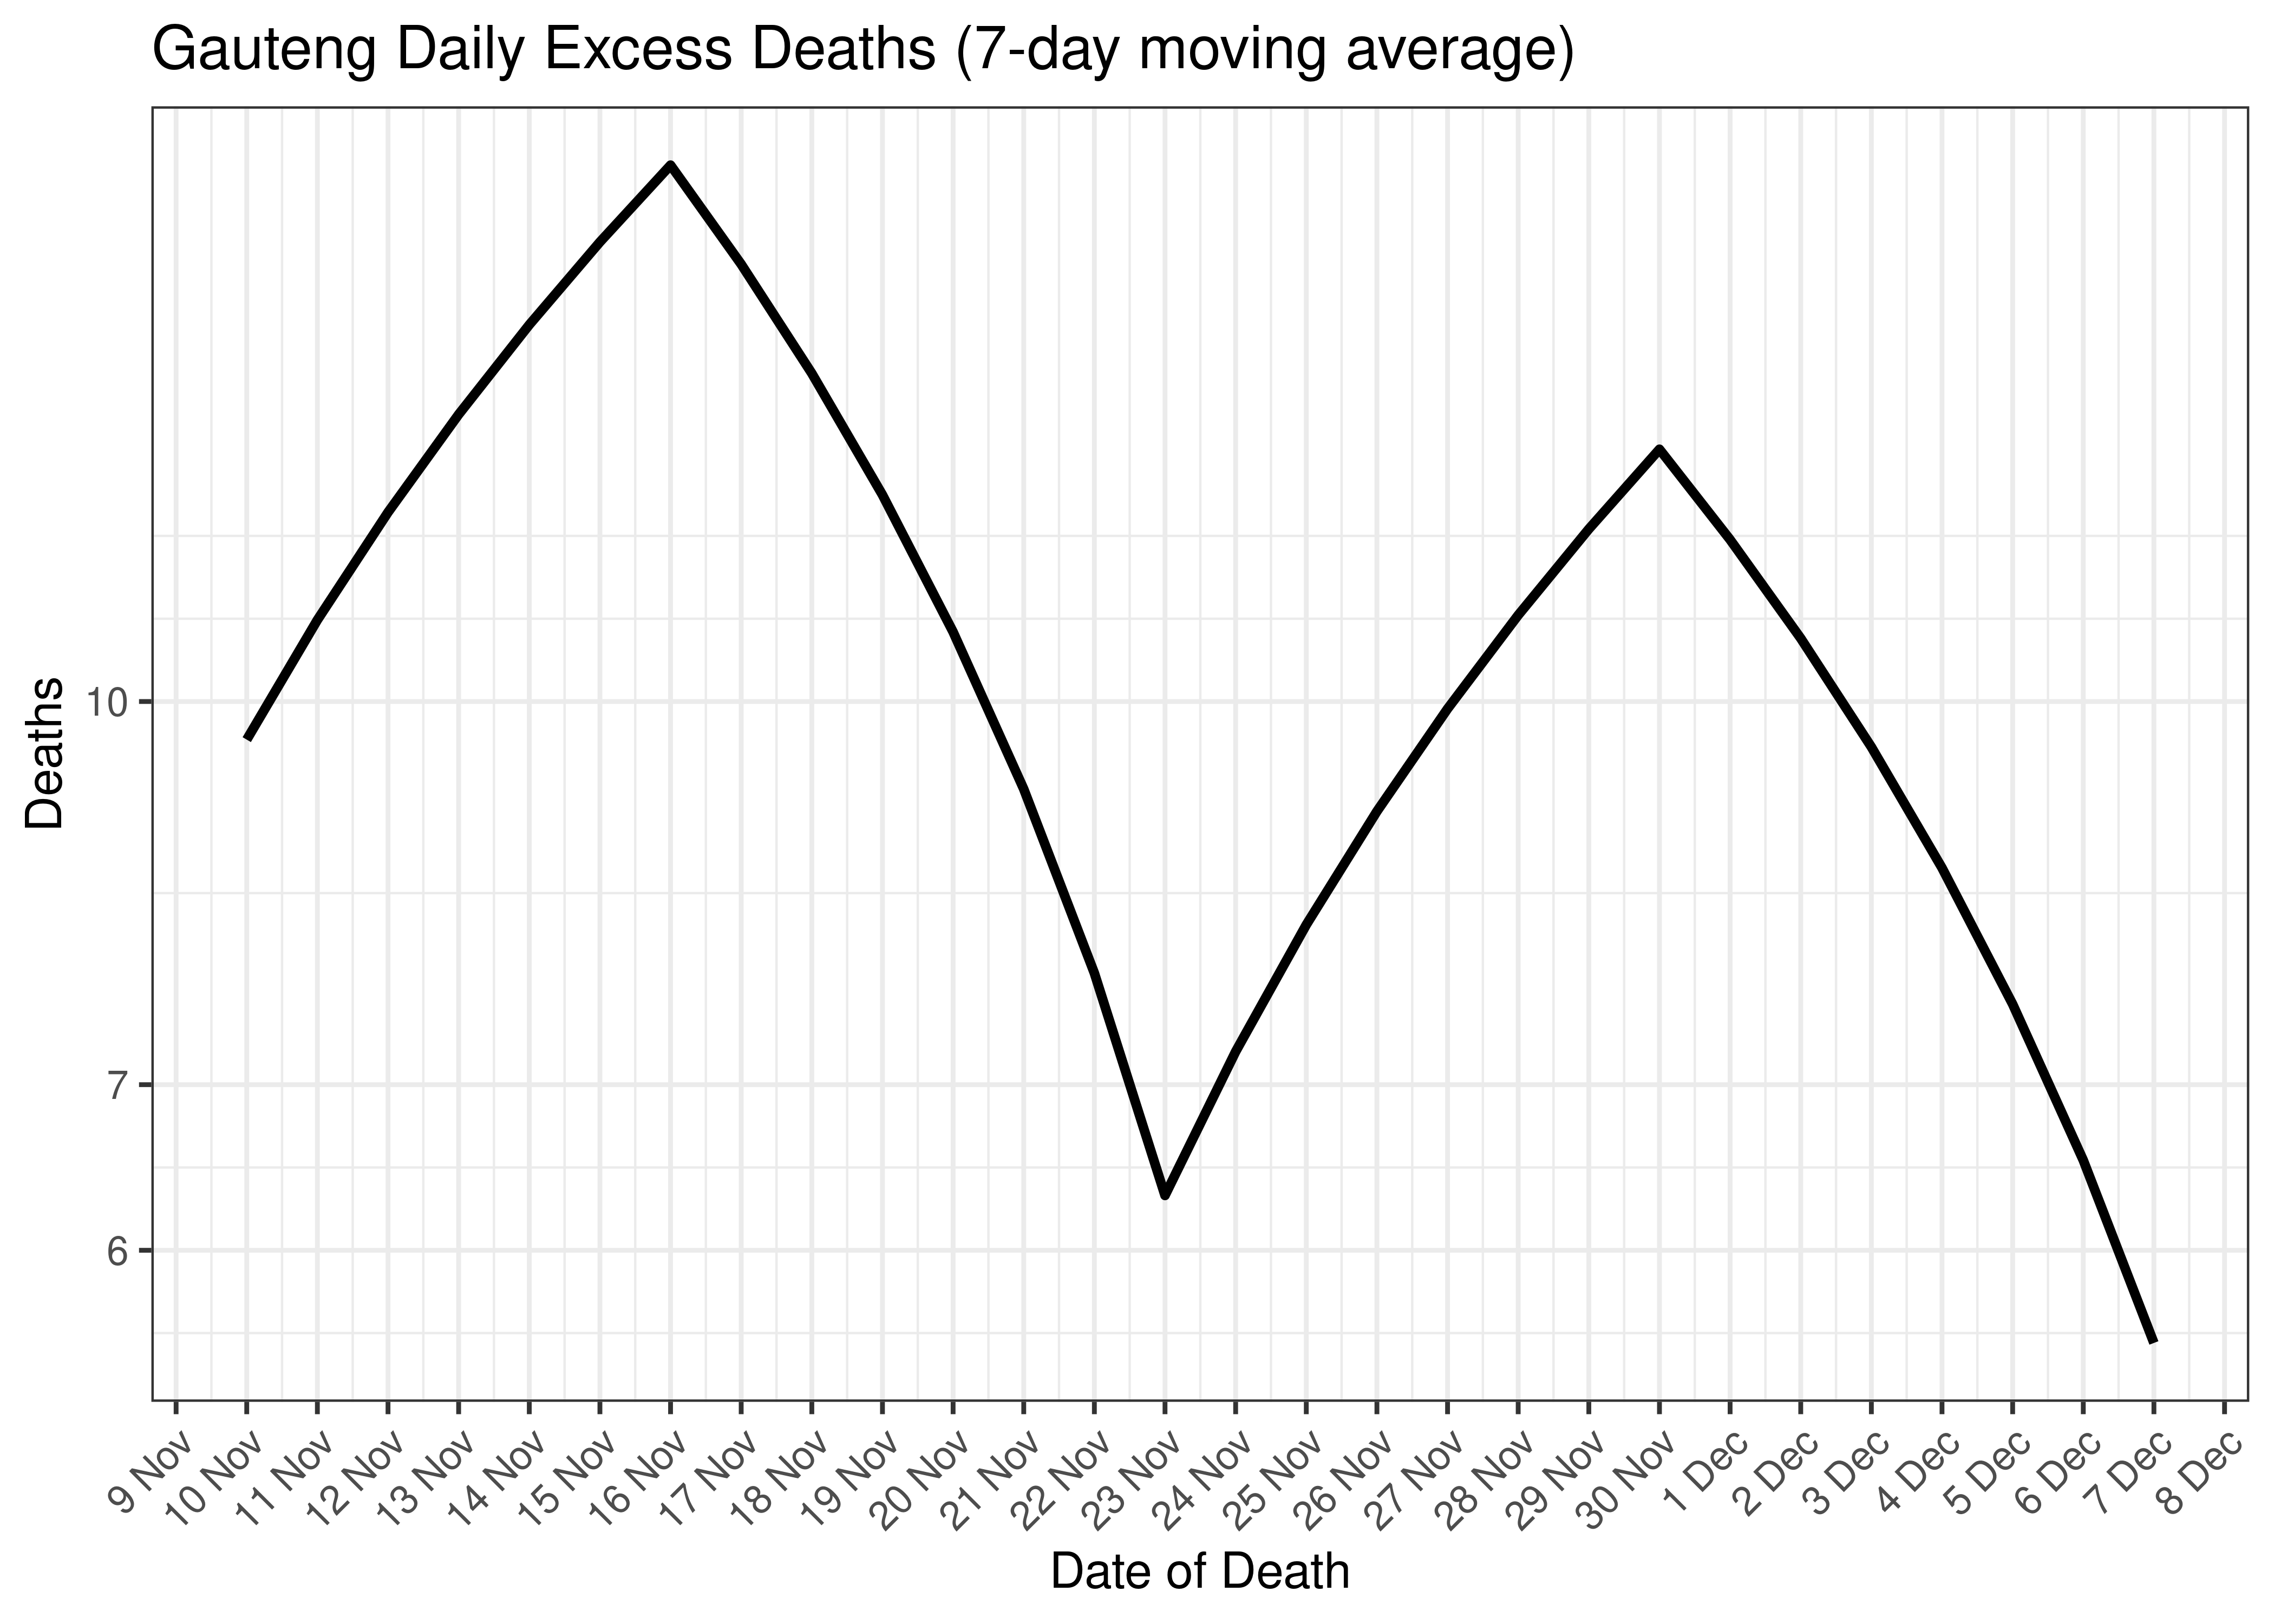 Gauteng Daily Excess Deaths for Last 30-days (7-day moving average)